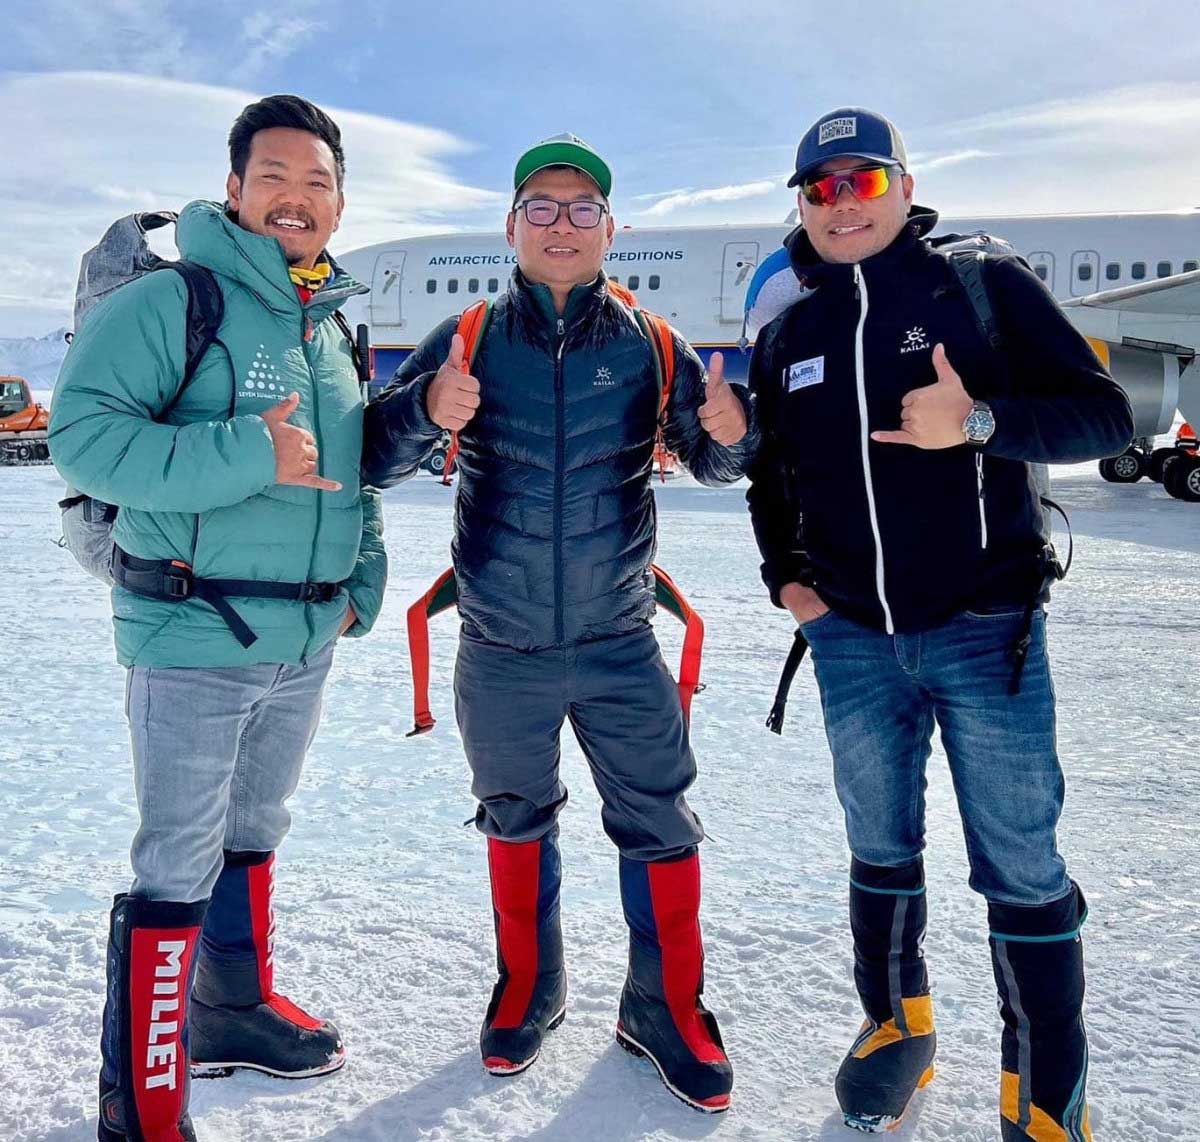 Three Sherpa Brothers Reach South Pole and Set a Record